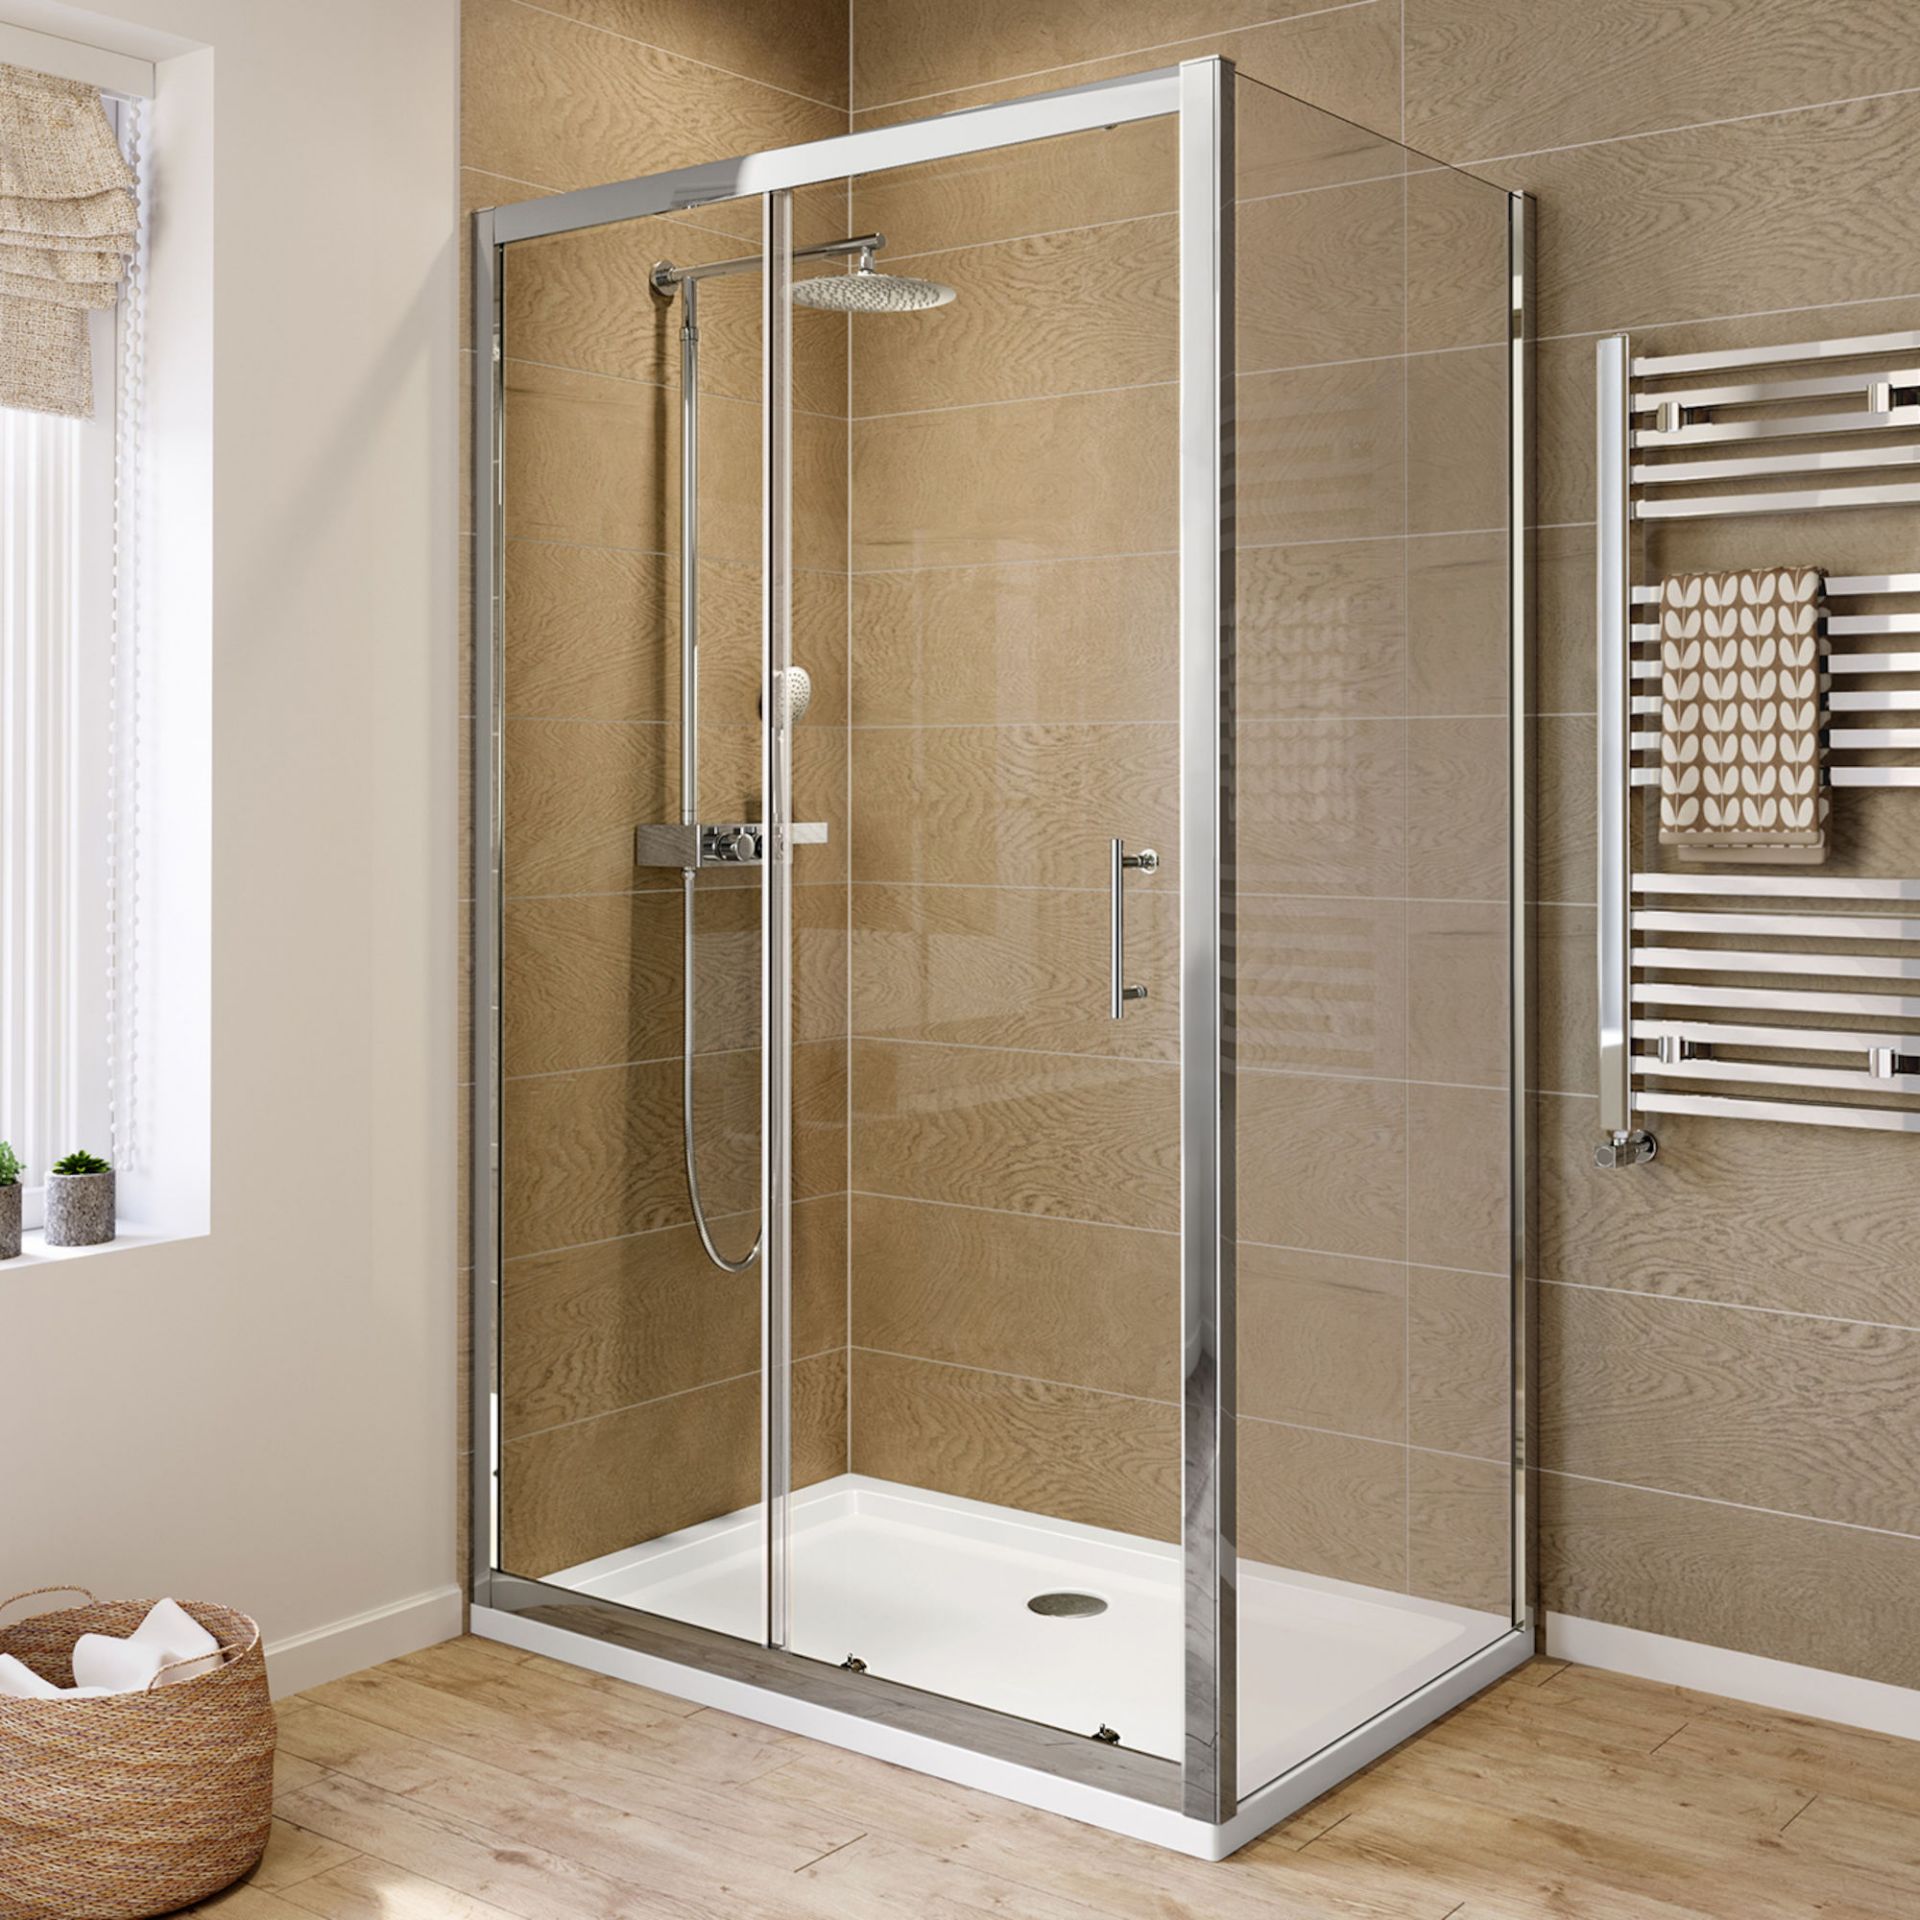 (AD29) 1200x760mm - 6mm - Elements Sliding Door Shower Enclosure. RRP £299.99. 6mm Safety Glass